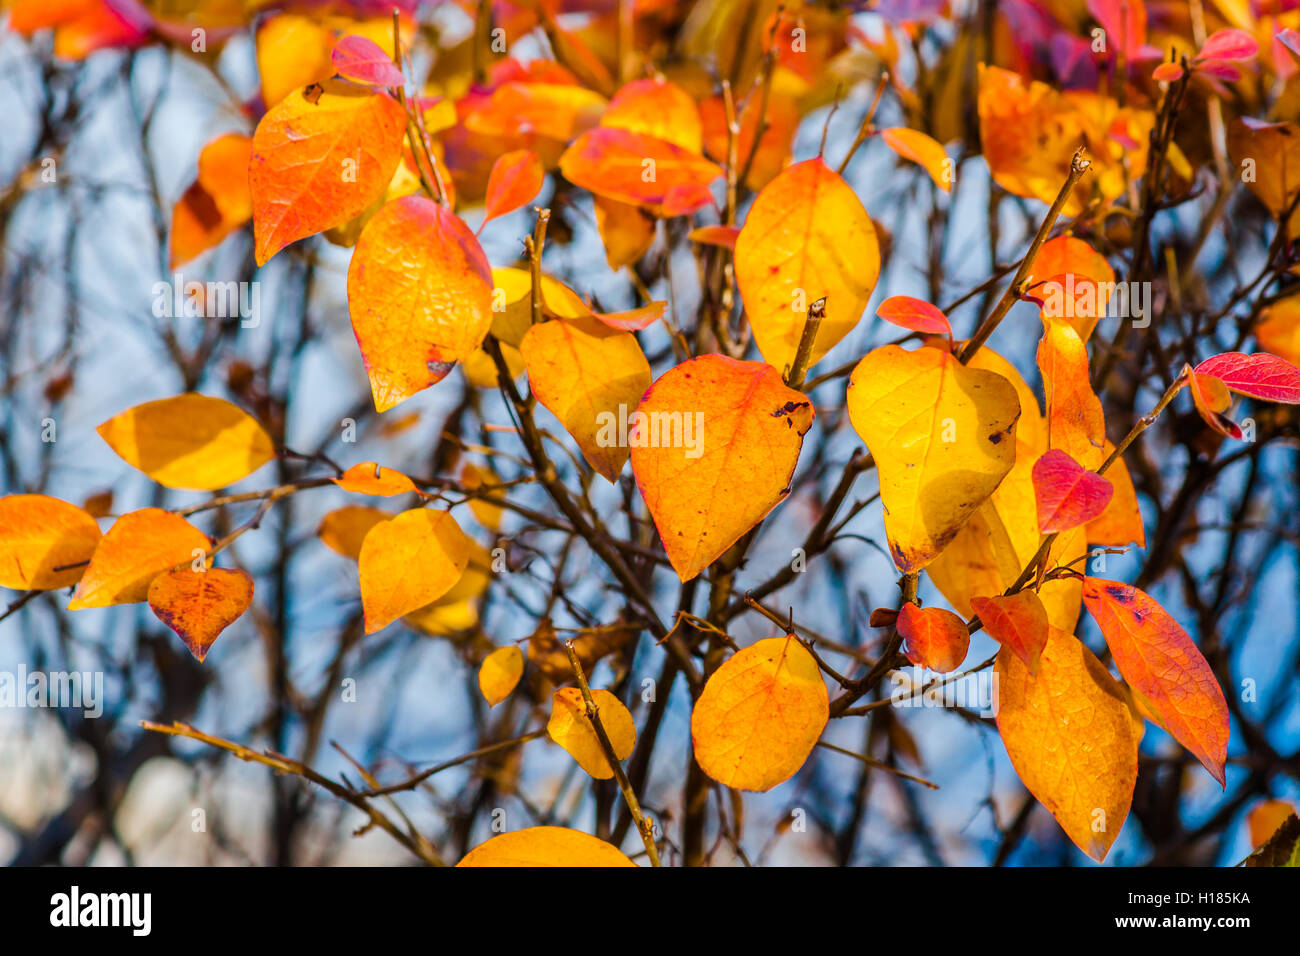 Orange dogwood or cotoneaster leaves against gray background. Colors of autumn season Stock Photo